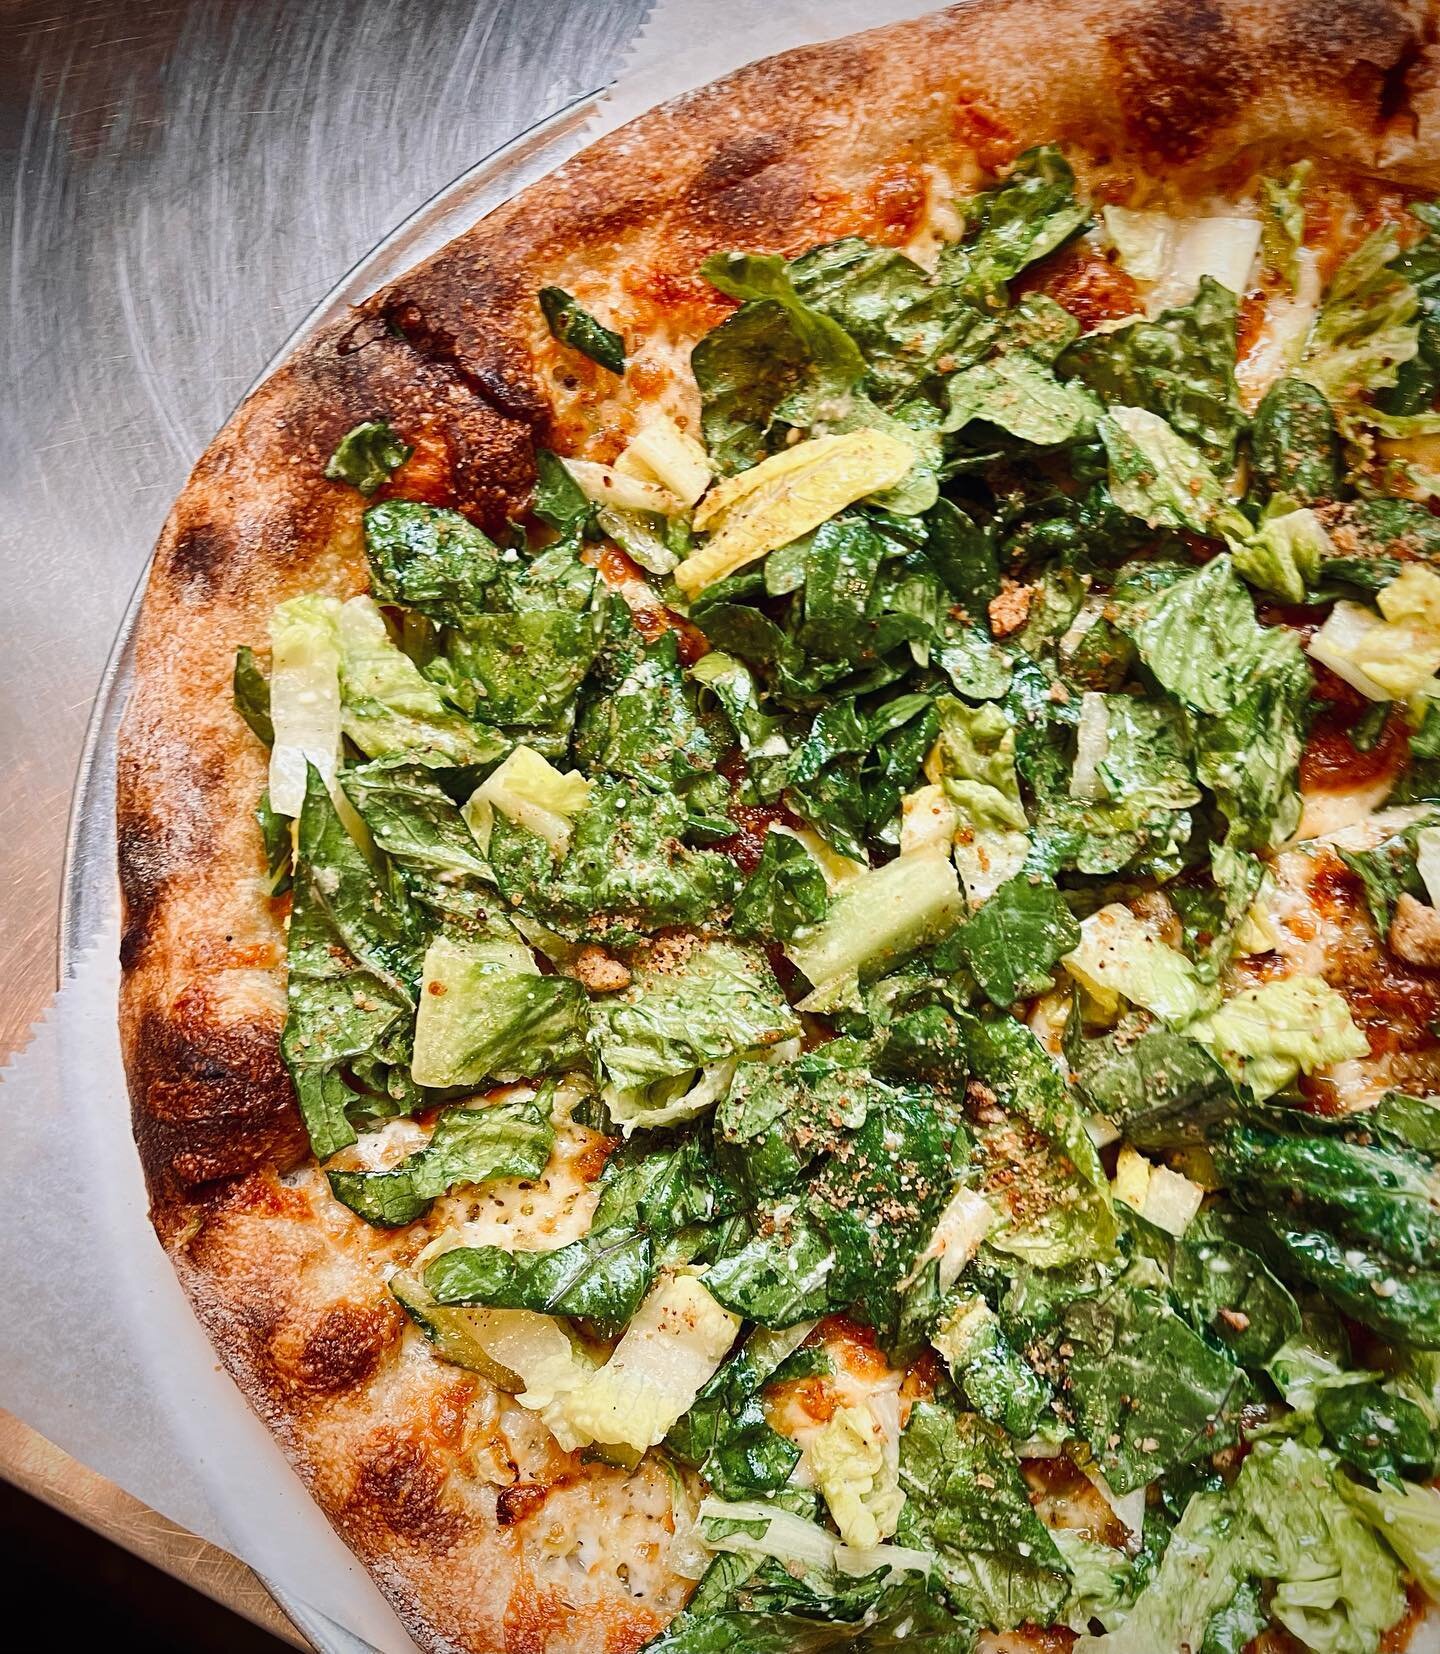 lots of people put salad on pizza

debuting the caesar salad pizza
featuring chef ben&rsquo;s famous dressing, tomten&rsquo;s kale, &amp; homemade breadcrumbs

🤌